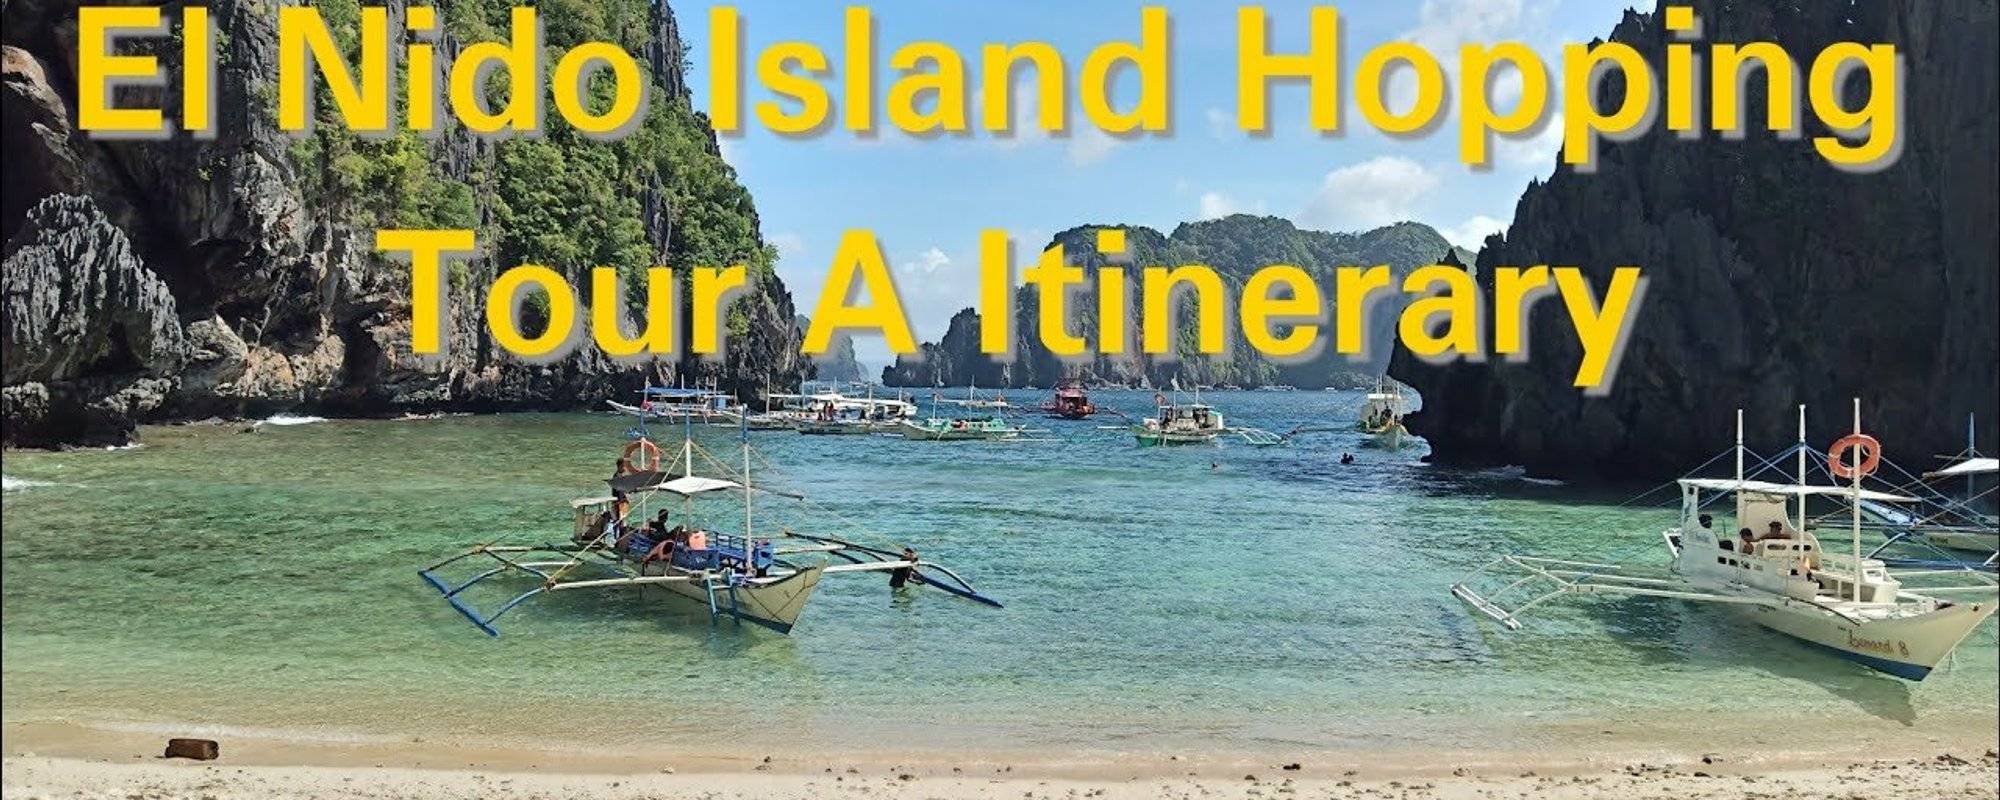 Island Hopping in El Nido, Palawan, Philippines: What to Expect in Tour A? Vlog